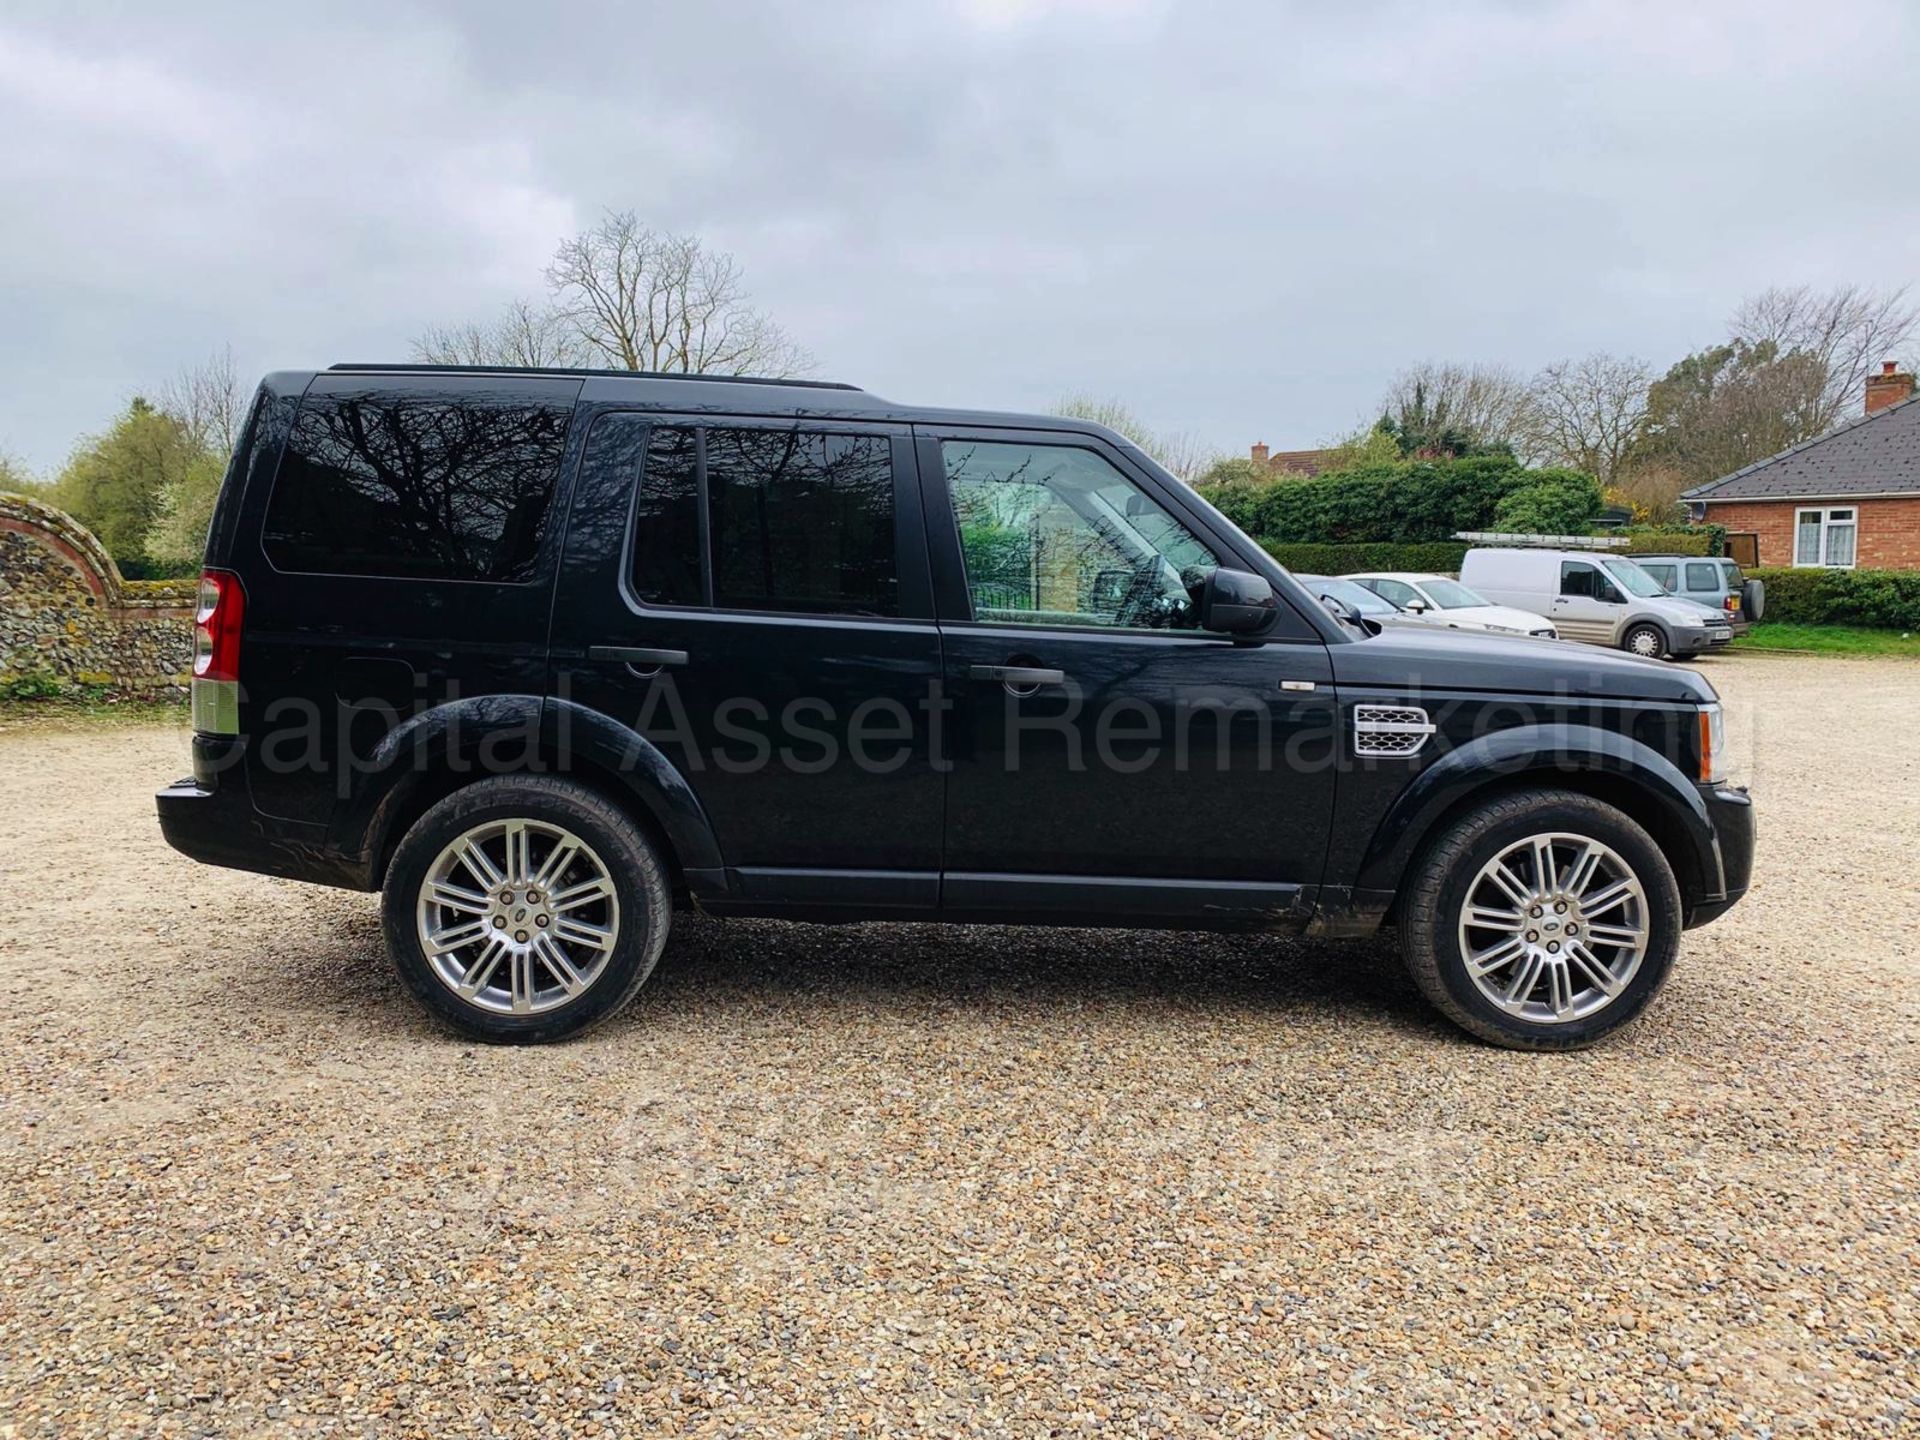 LAND ROVER DISCOVERY *HSE EDITION* 7 SEATER SUV (2012 MODEL) '3.0 SDV6- 8 SPEED AUTO' **HUGE SPEC** - Image 15 of 48